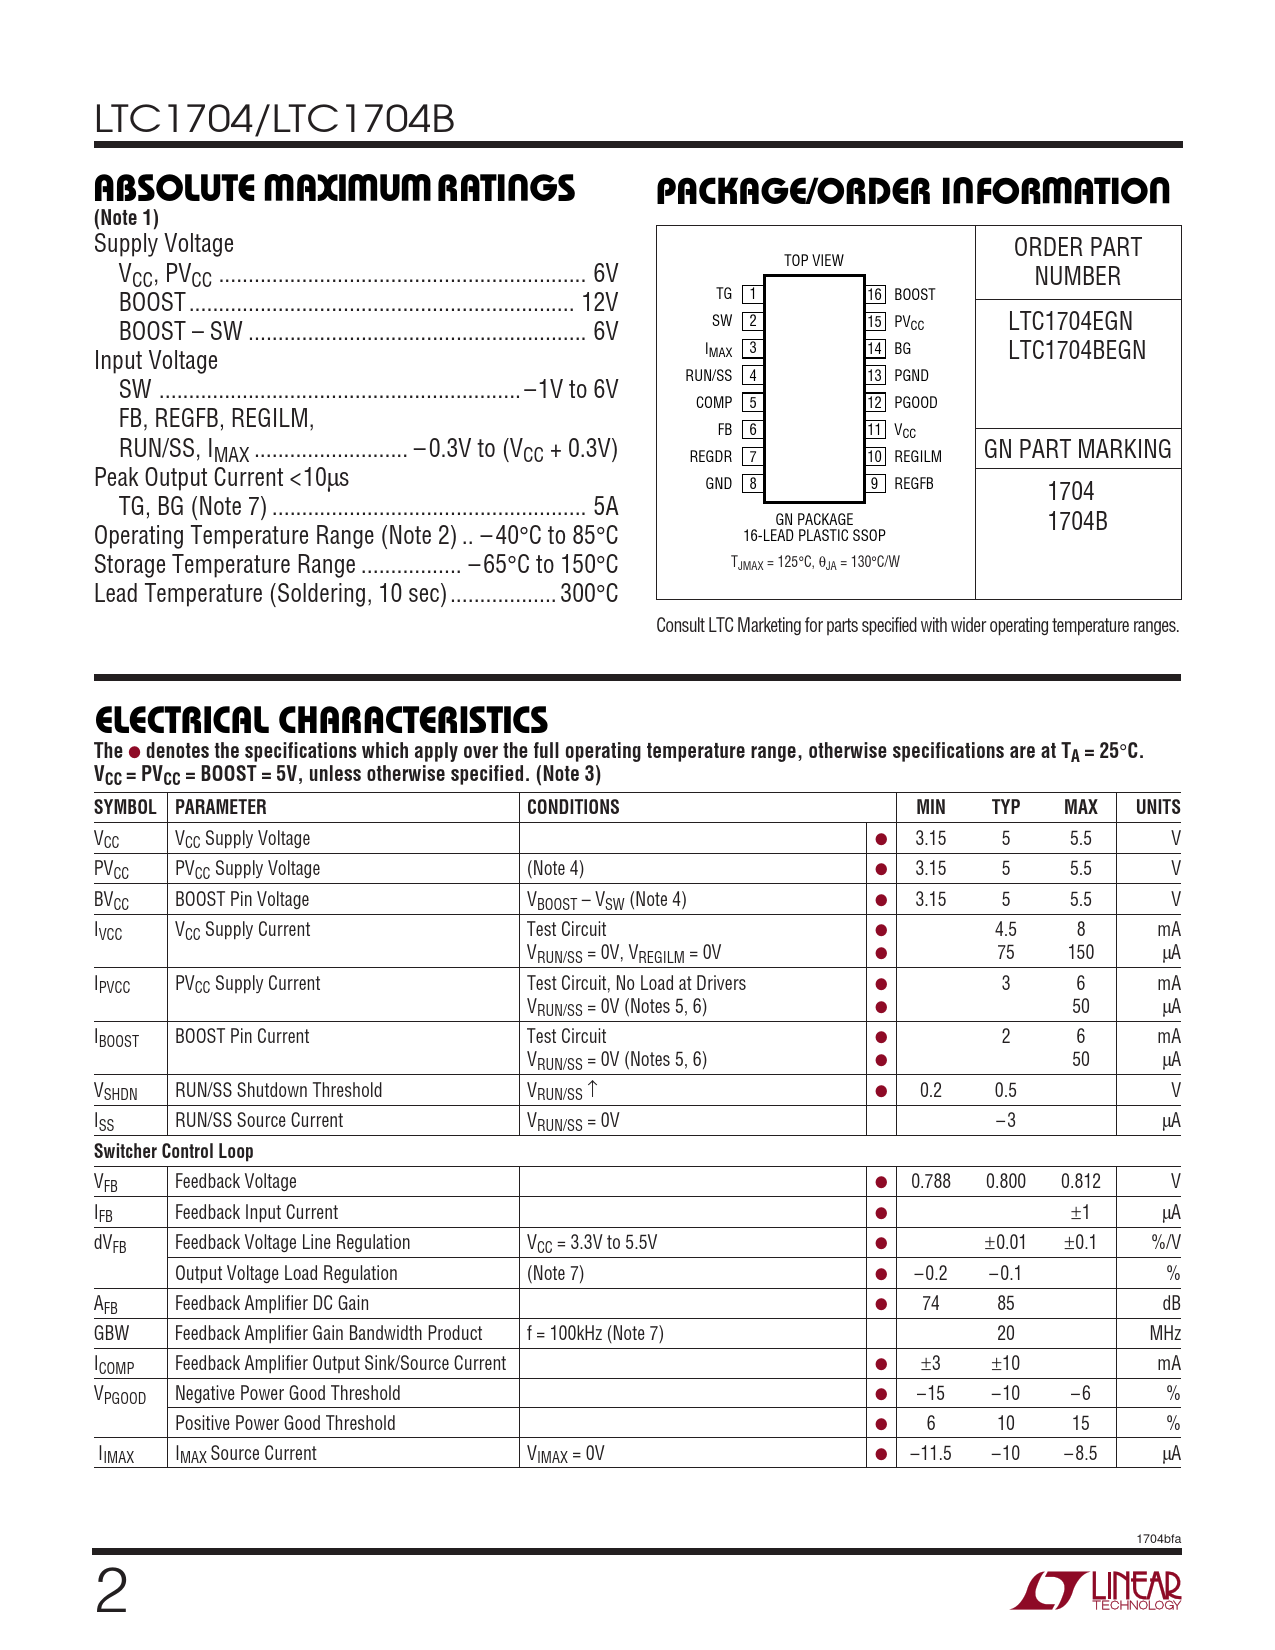 ABSOLUTE AXI U RATI GS PACKAGE/ORDER I FOR ATIO (Note 1) ELECTRICAL CHARACTERISTICS The